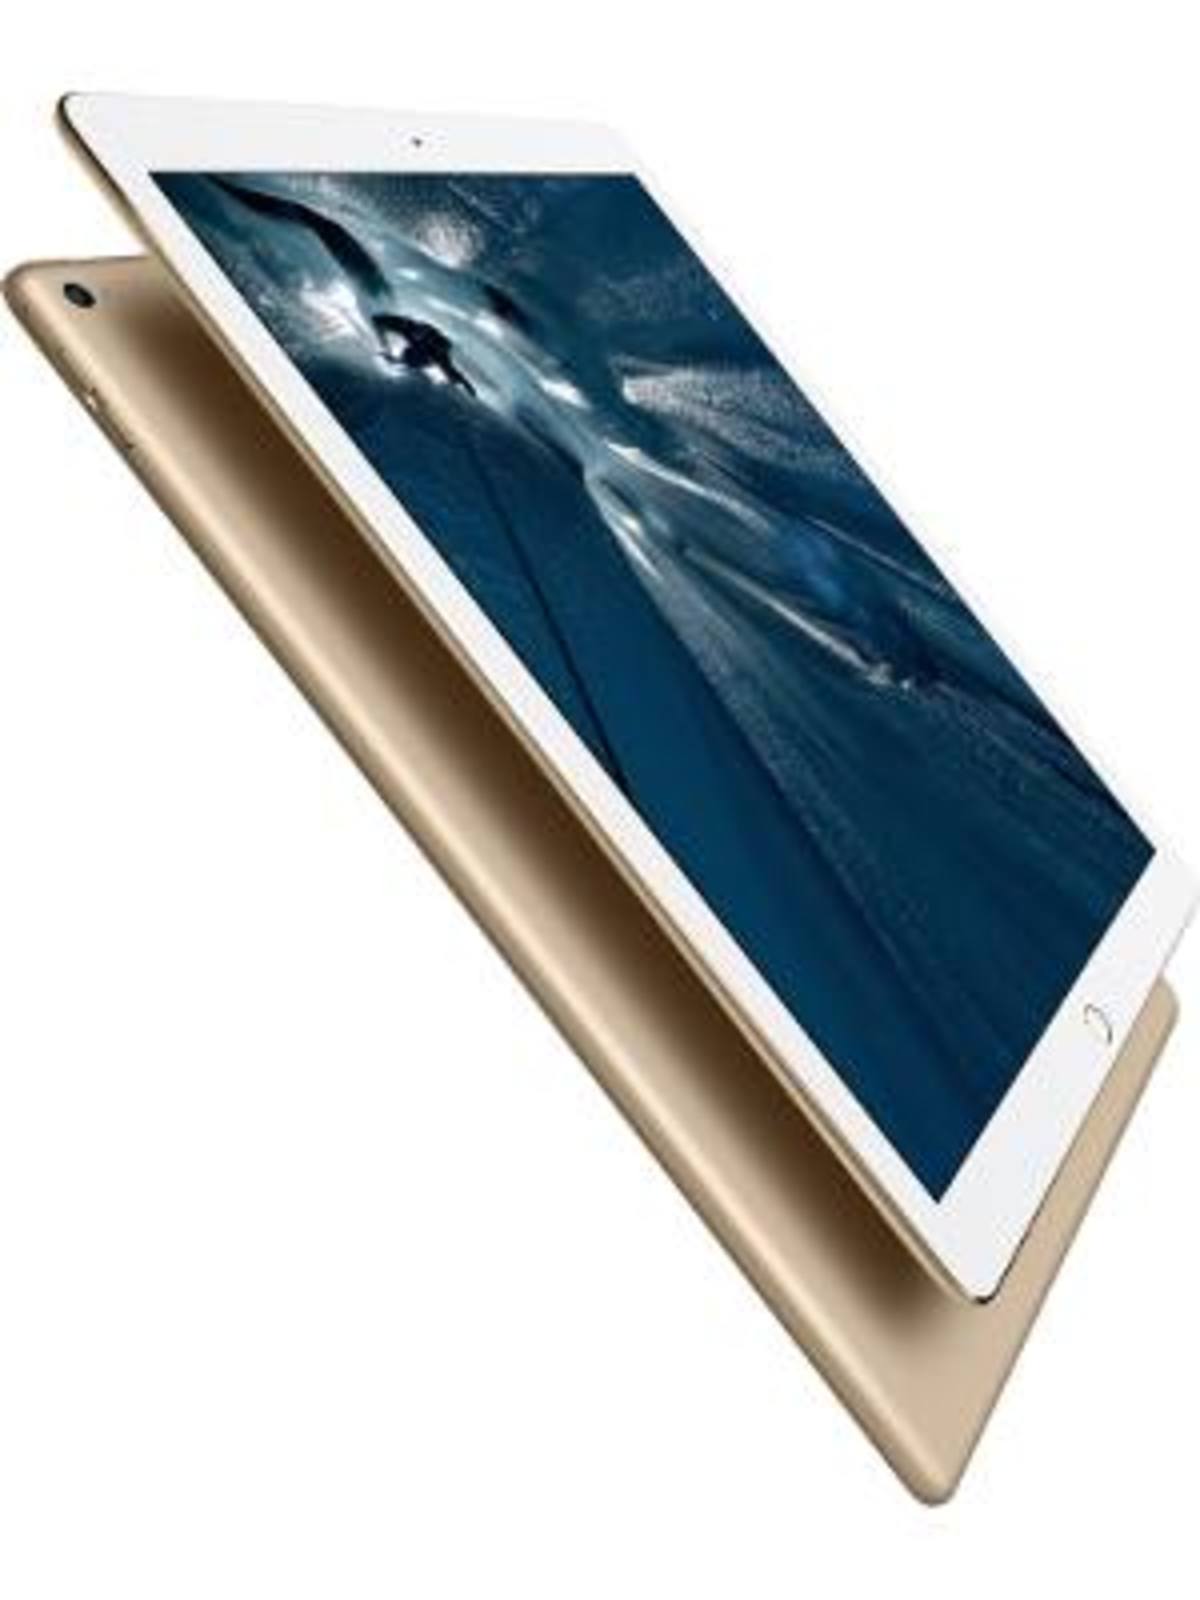 Apple iPad Pro WiFi 128GB Price in India, Full Specifications (31st Jul  2022) at Gadgets Now